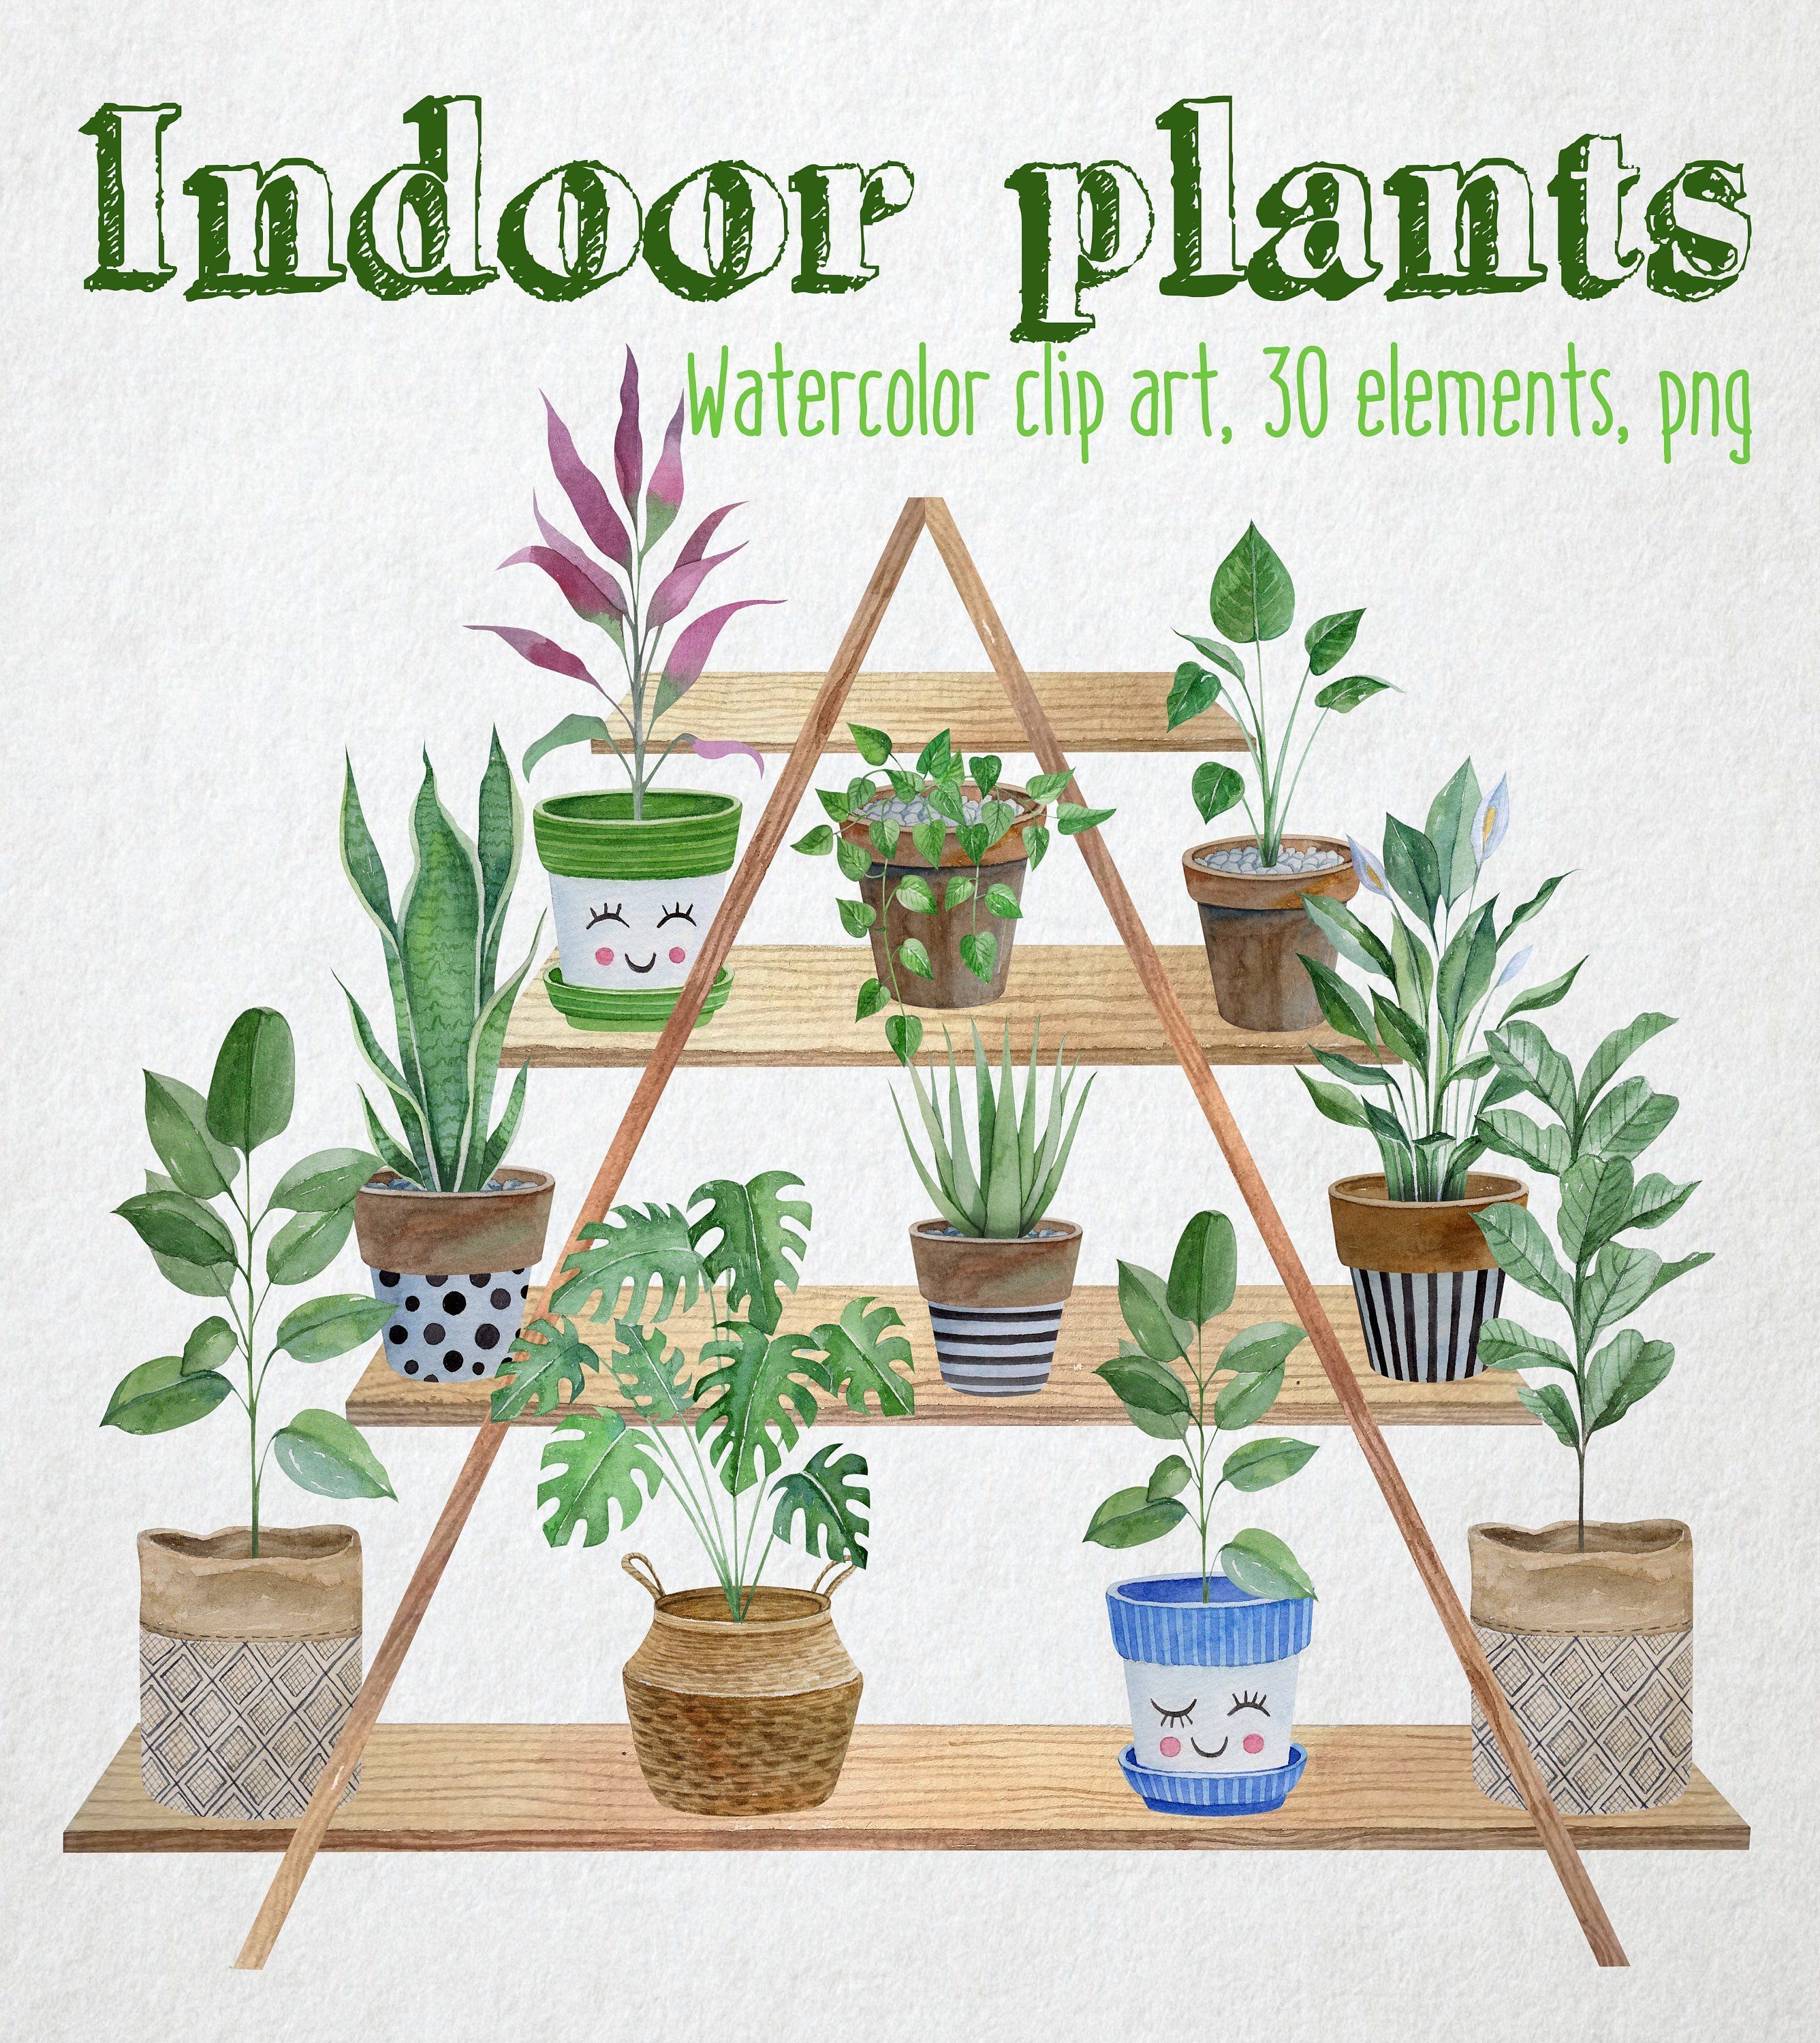 Indoor Plants watercolor clipart. Potted plants illustration. Watercolor house plants in ceramic pots -   17 indoor plants Background ideas